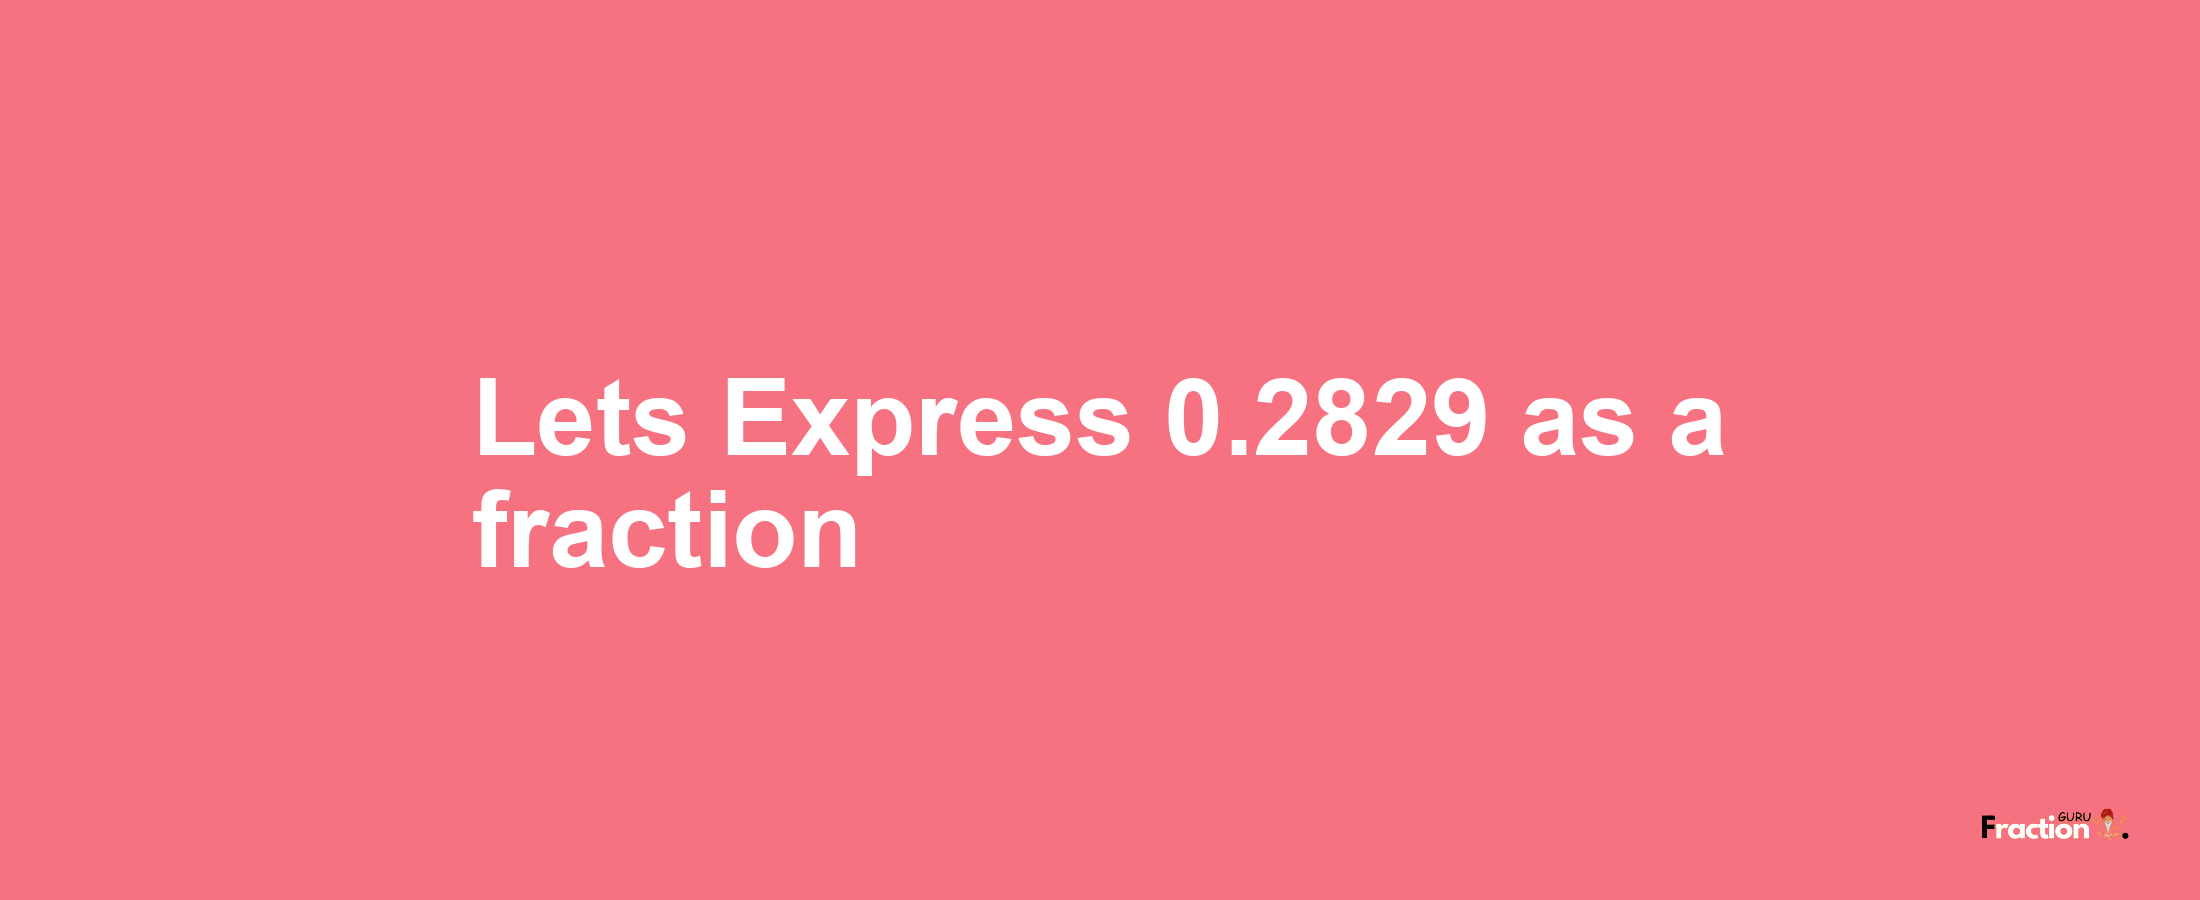 Lets Express 0.2829 as afraction